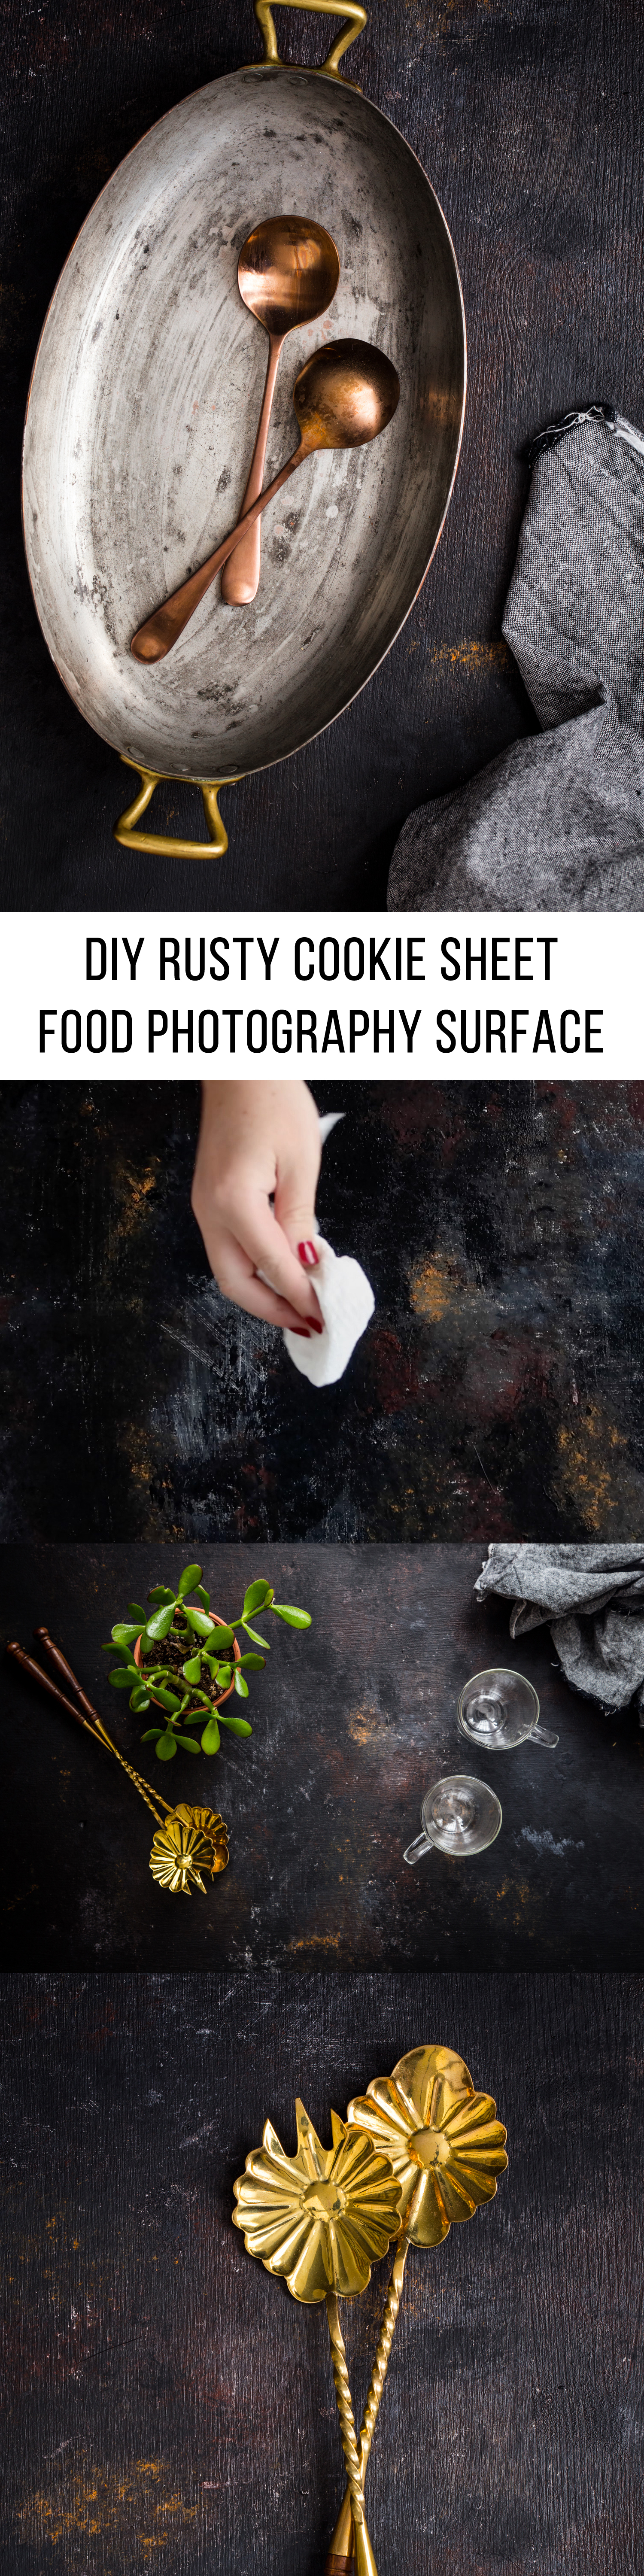 How To Video: DIY Rusty Cookie Sheet Surface for Moody Food Photography 